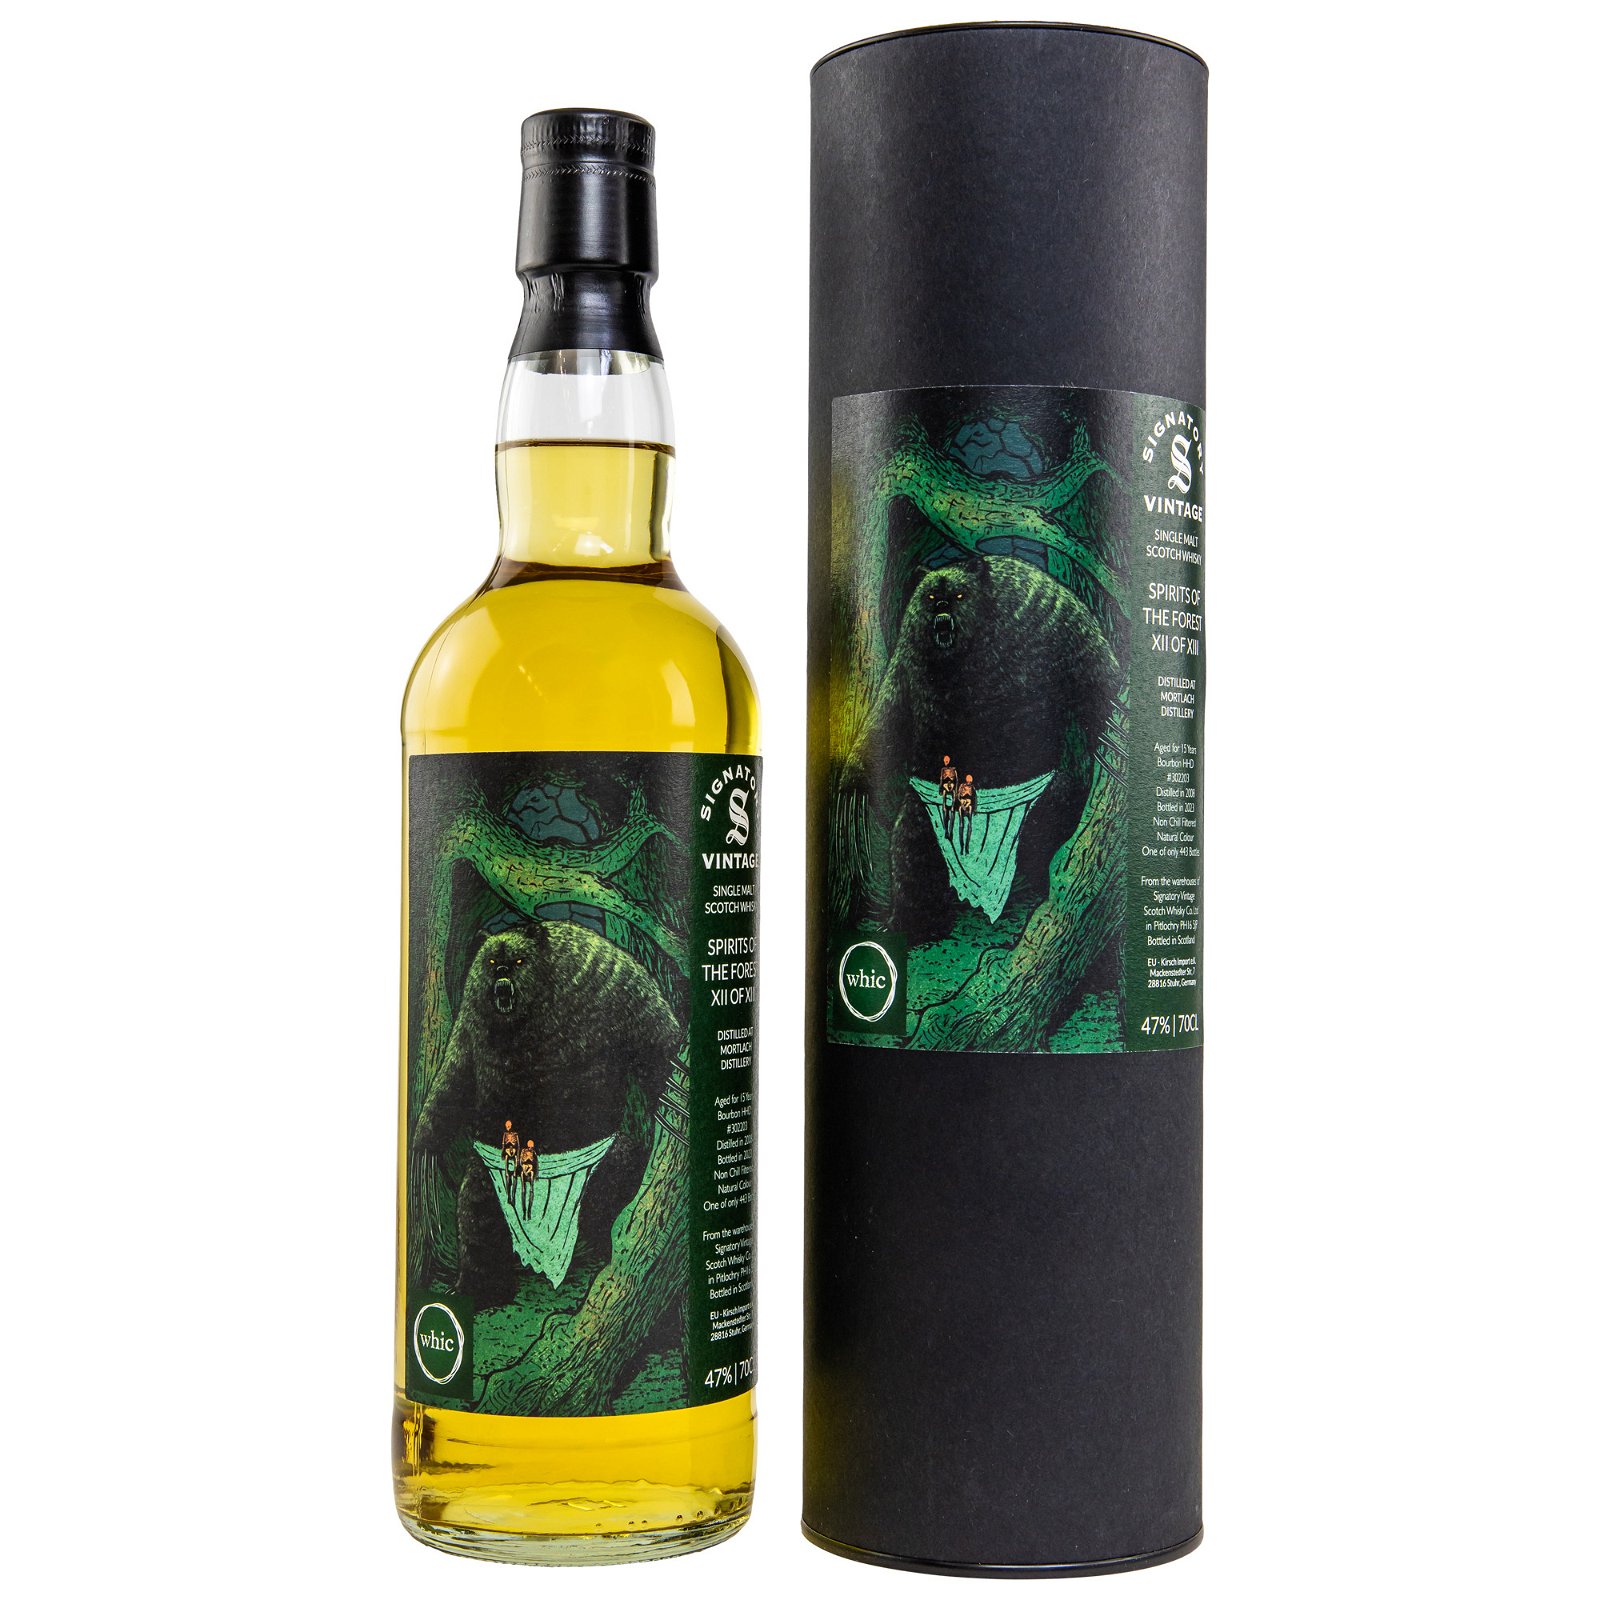 Mortlach 2008/2023 - 15 Jahre Single Bourbon Hogshead No. 302203 Spirits of the Forest XII of XIII (whic)